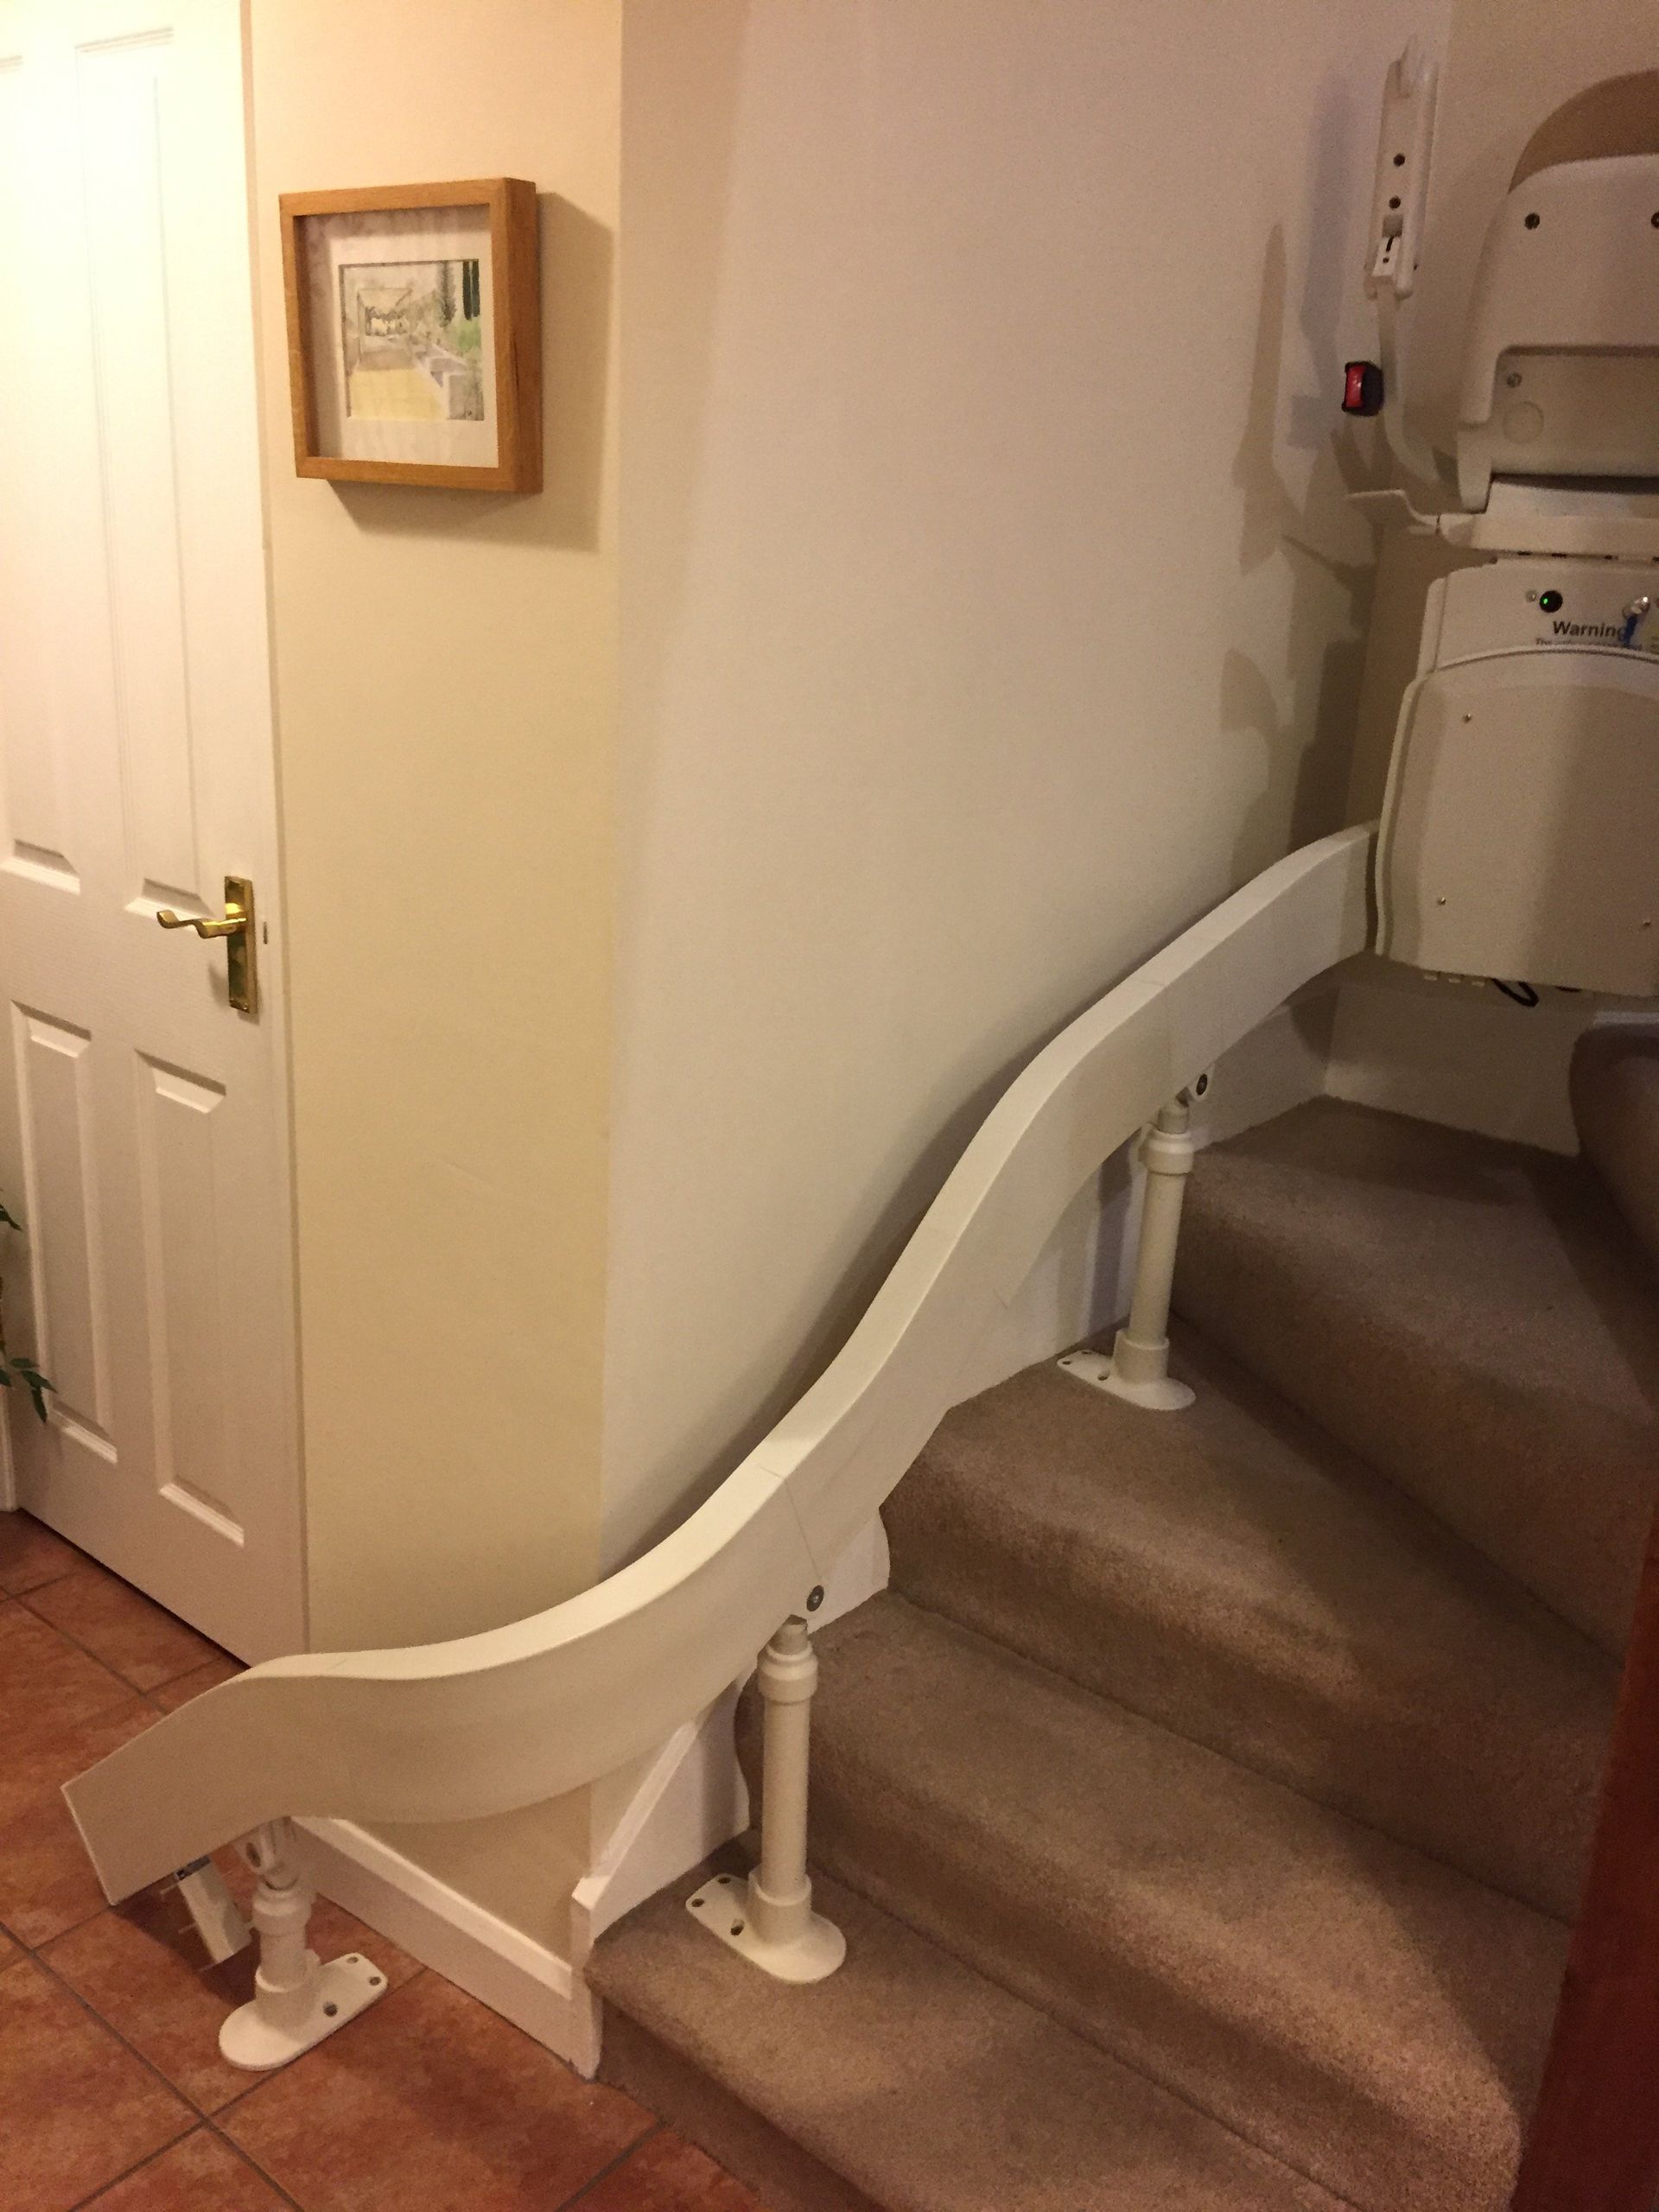 Reconditioned curved chair-lift, Congleton, Cheshire. Helping Hand Stairlifts.